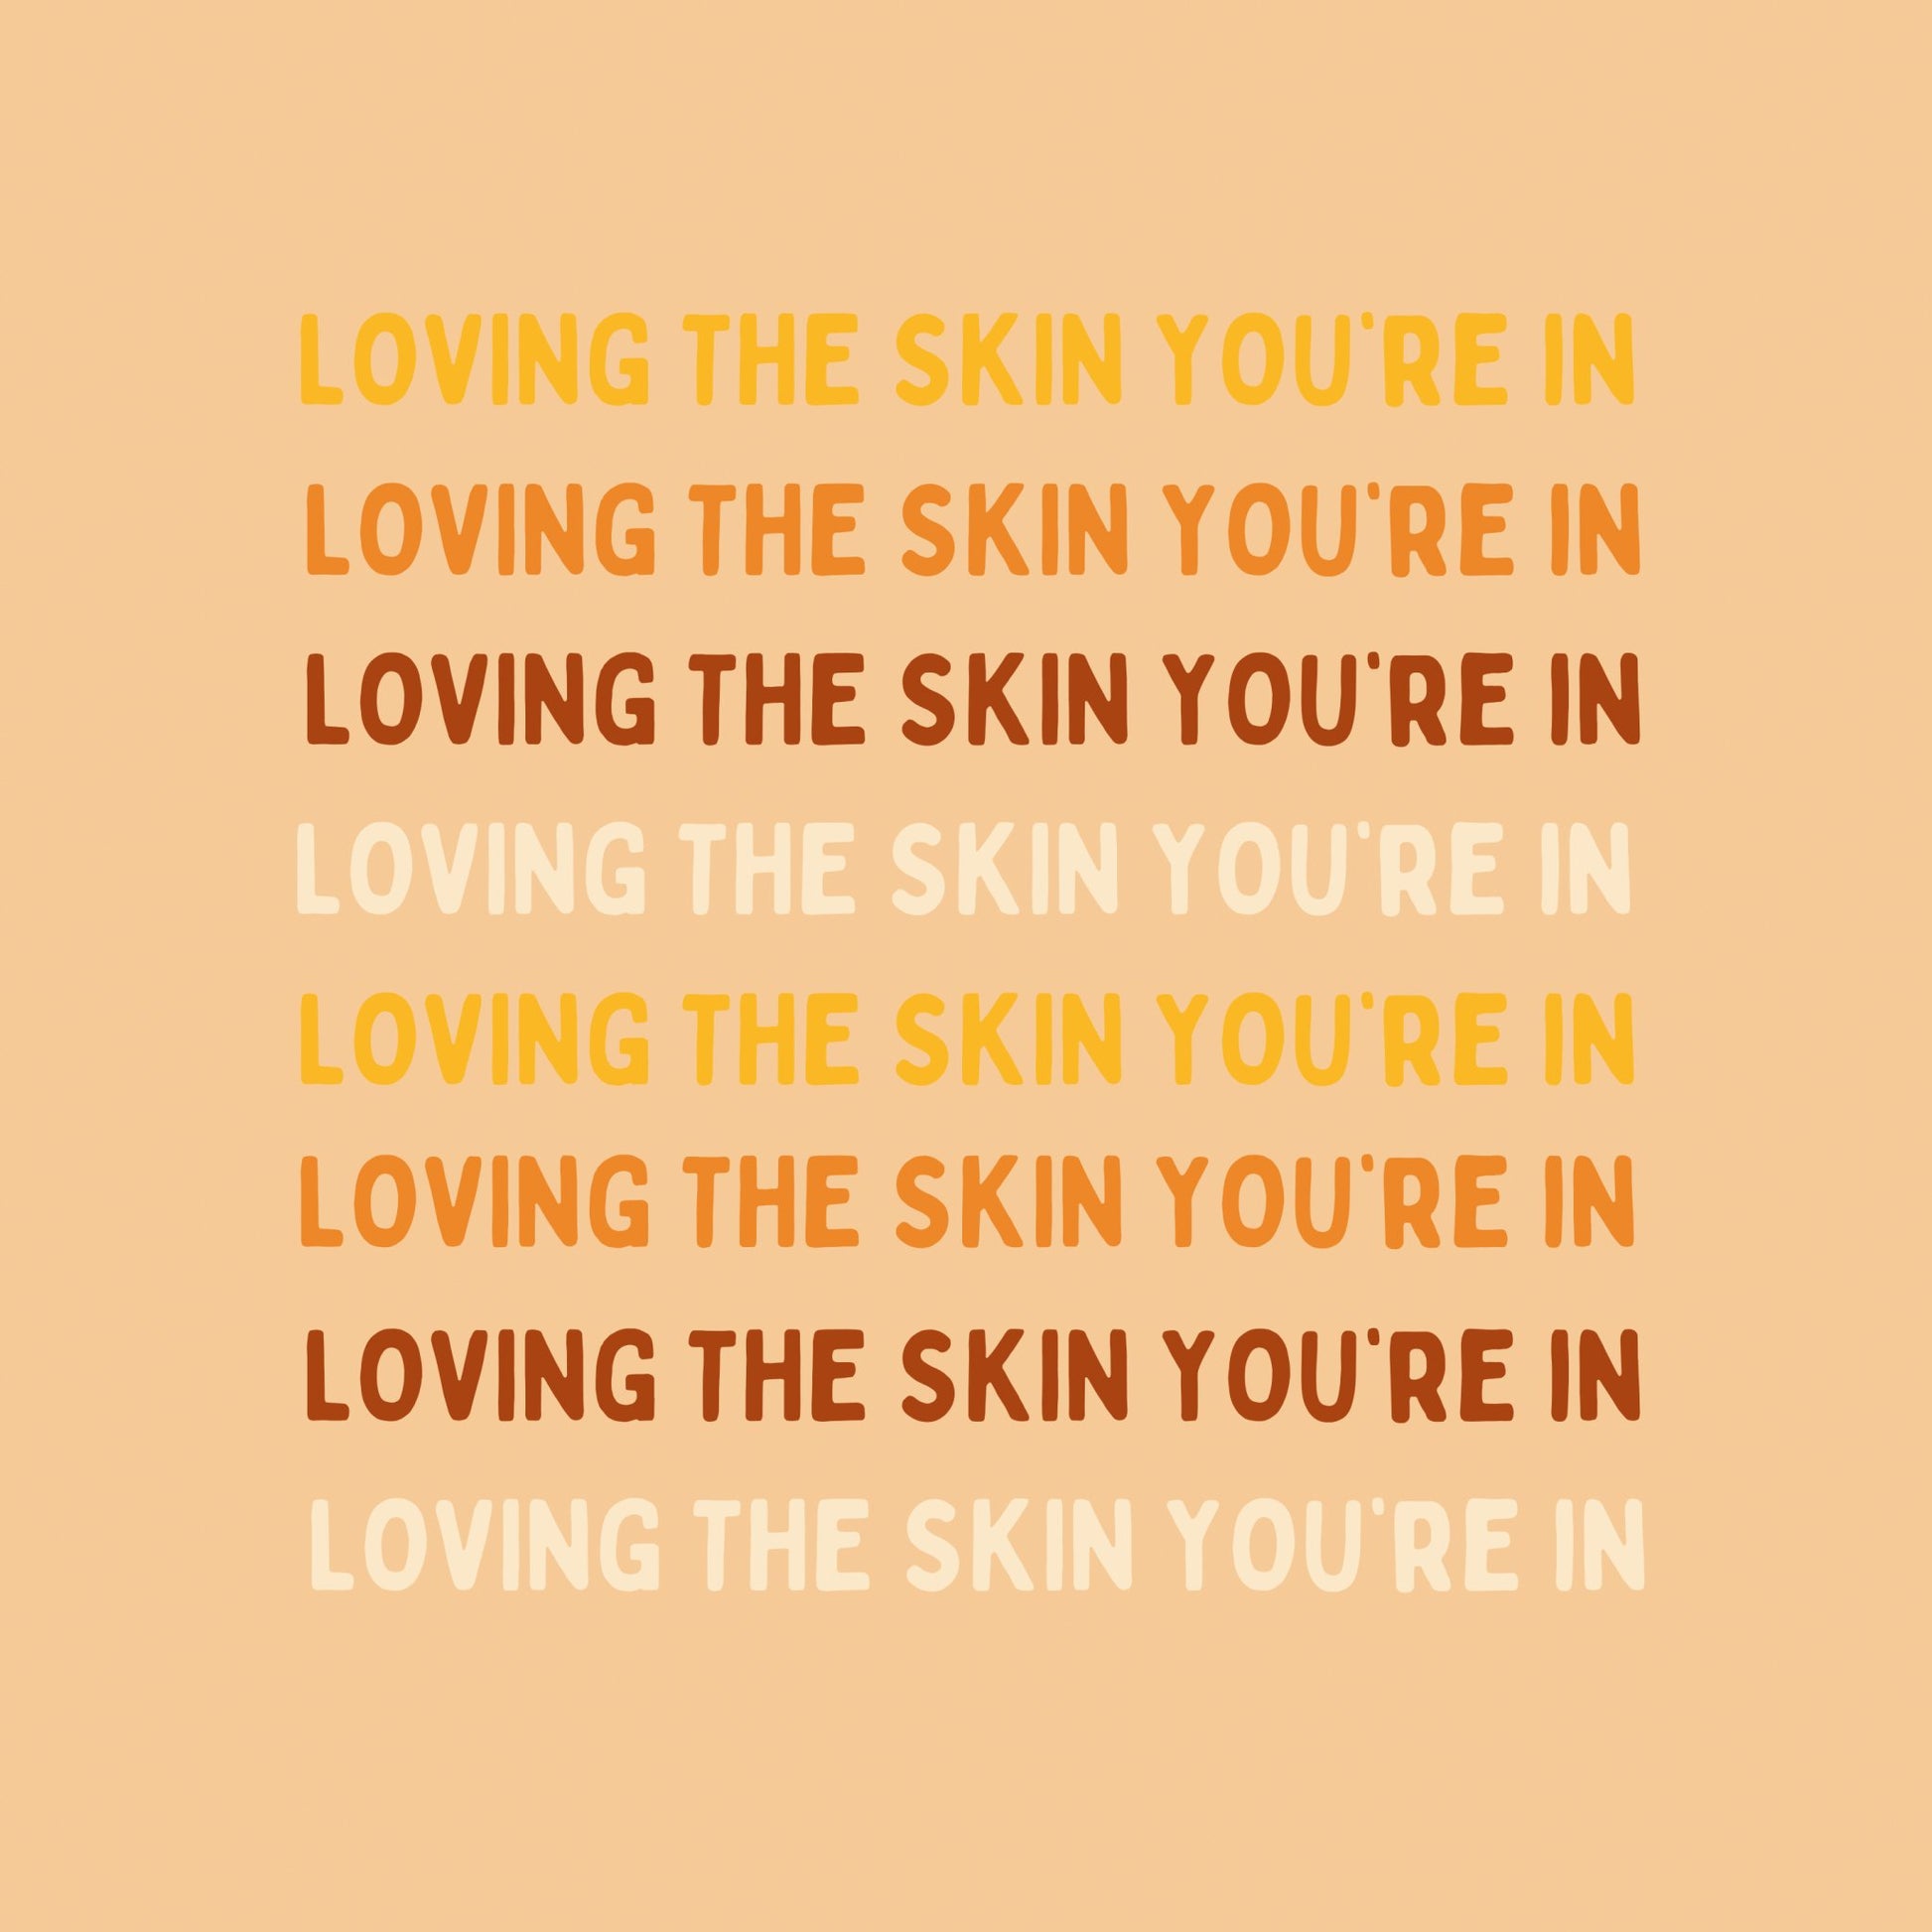 Loving The Skin You're In Workshop - All With Heart